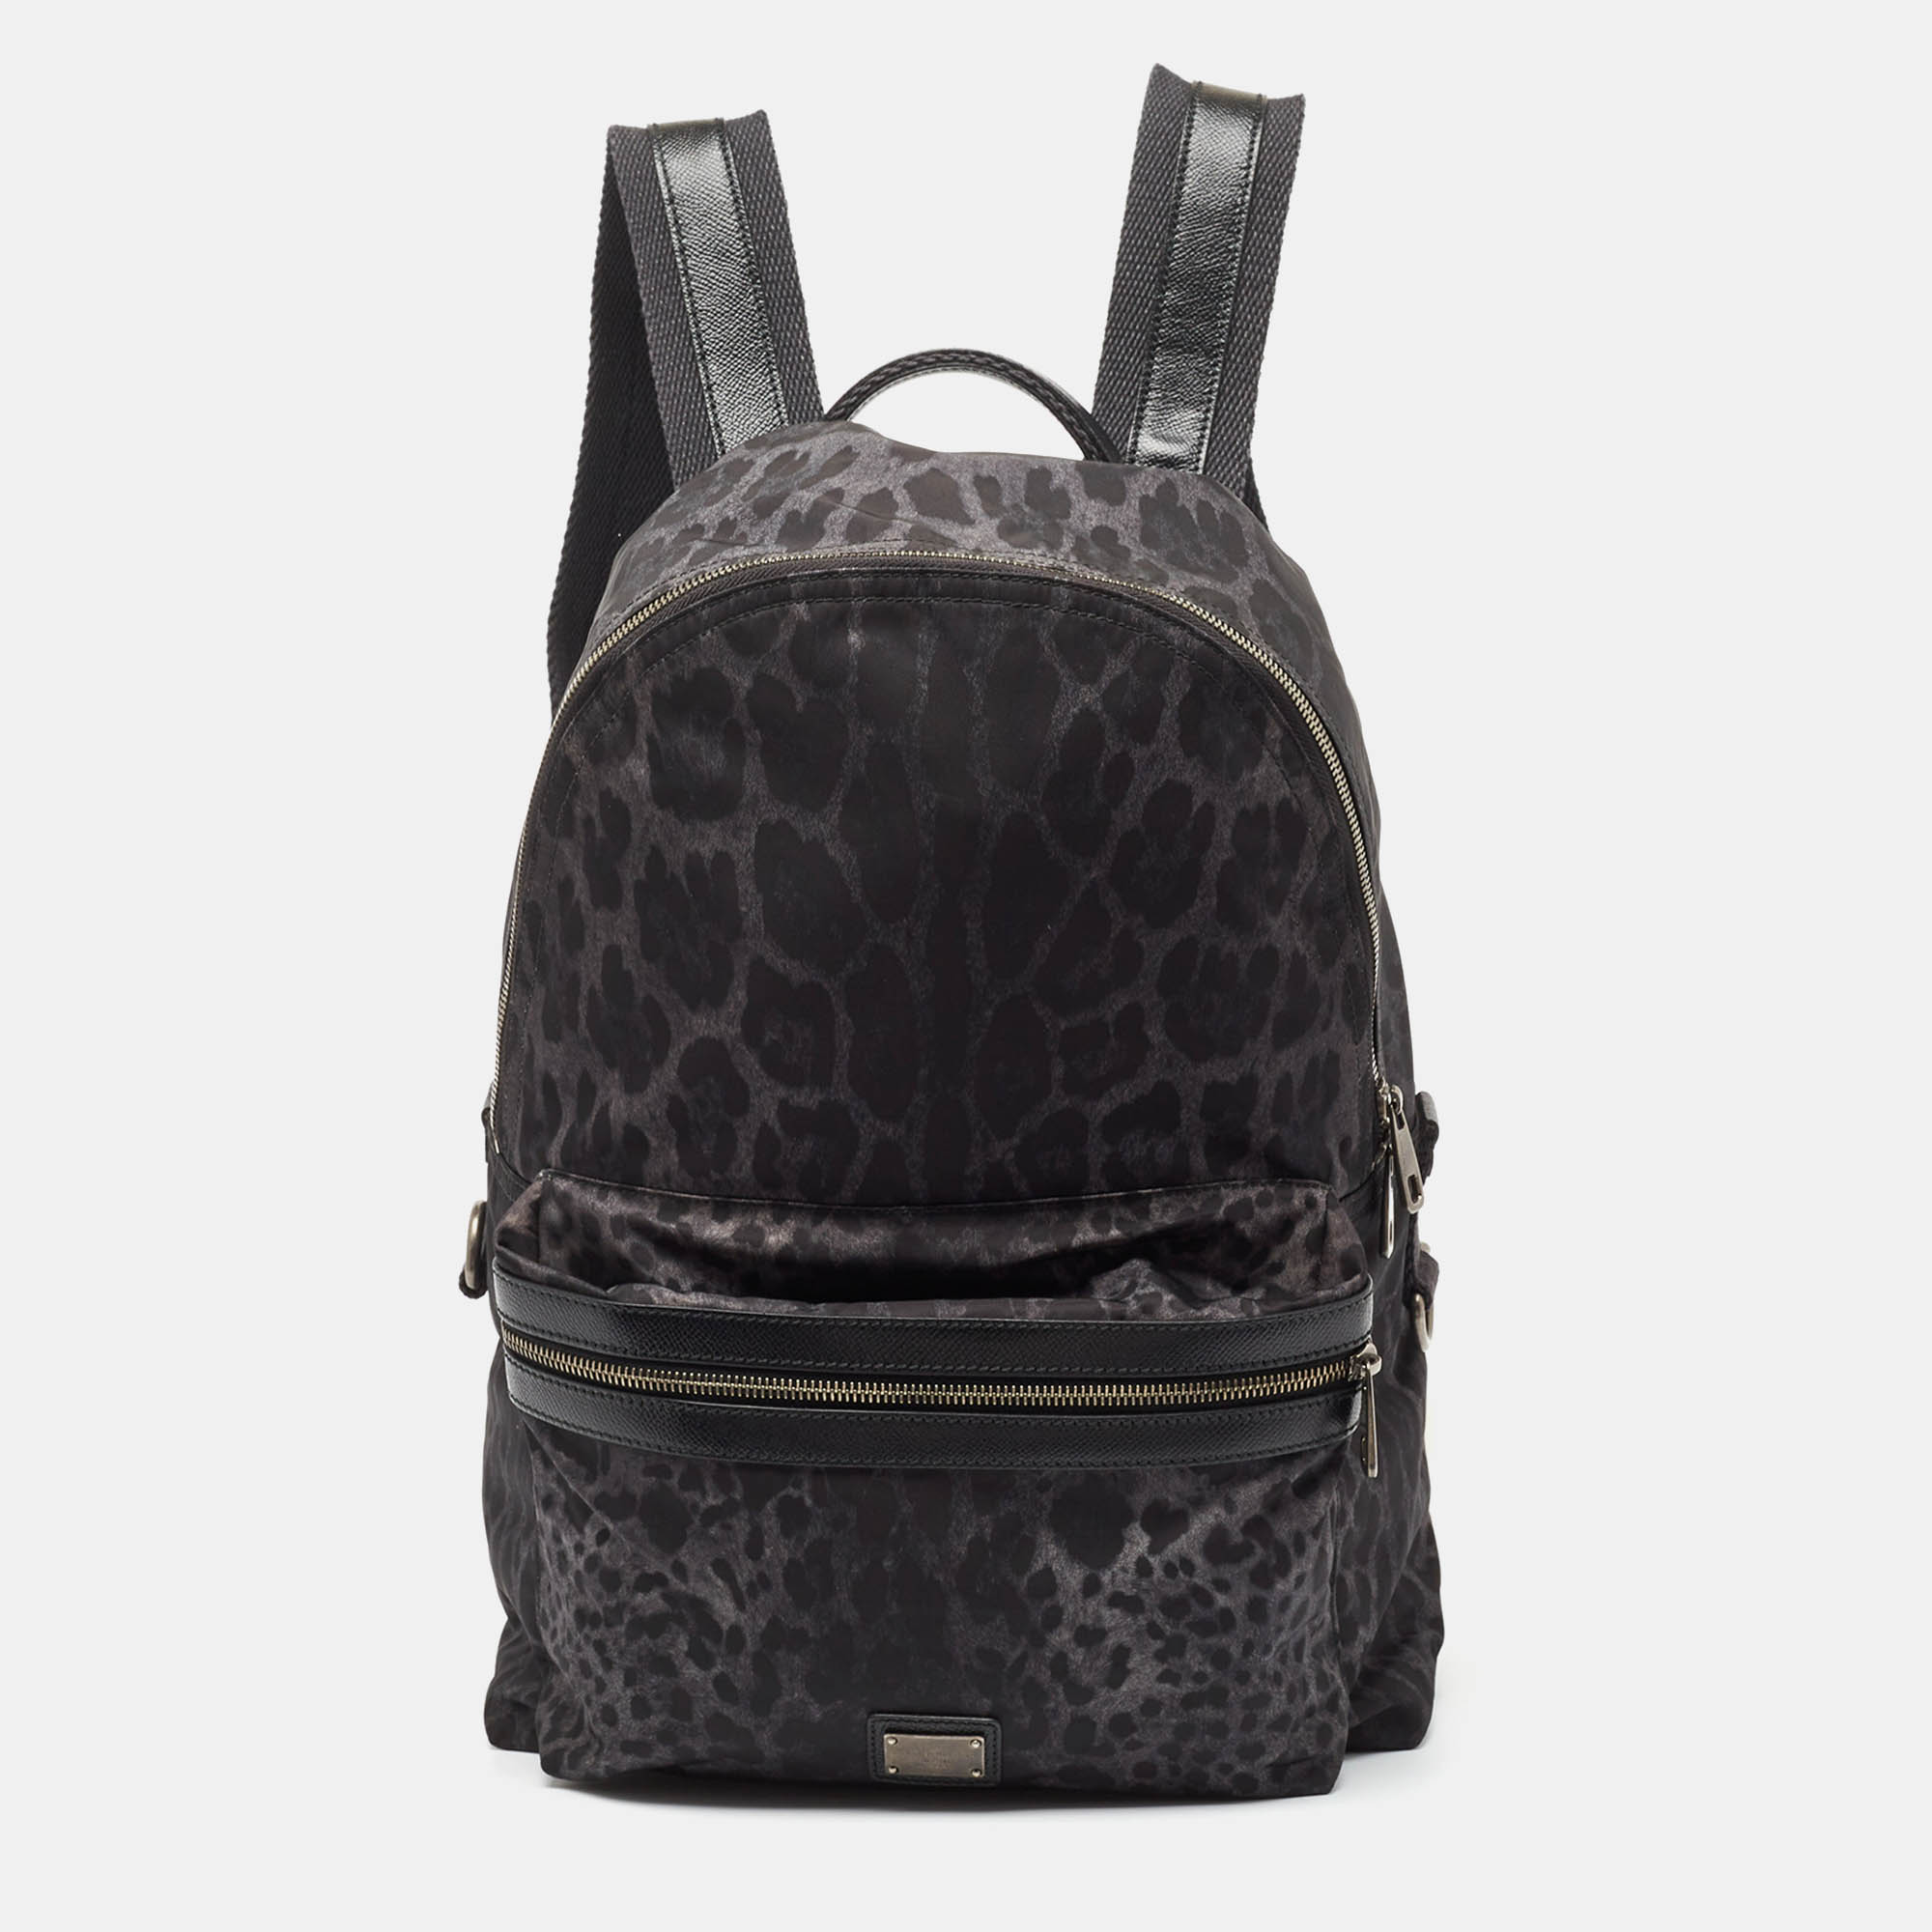 Pre-owned Dolce & Gabbana Black Leopard Print Nylon And Leather Backpack